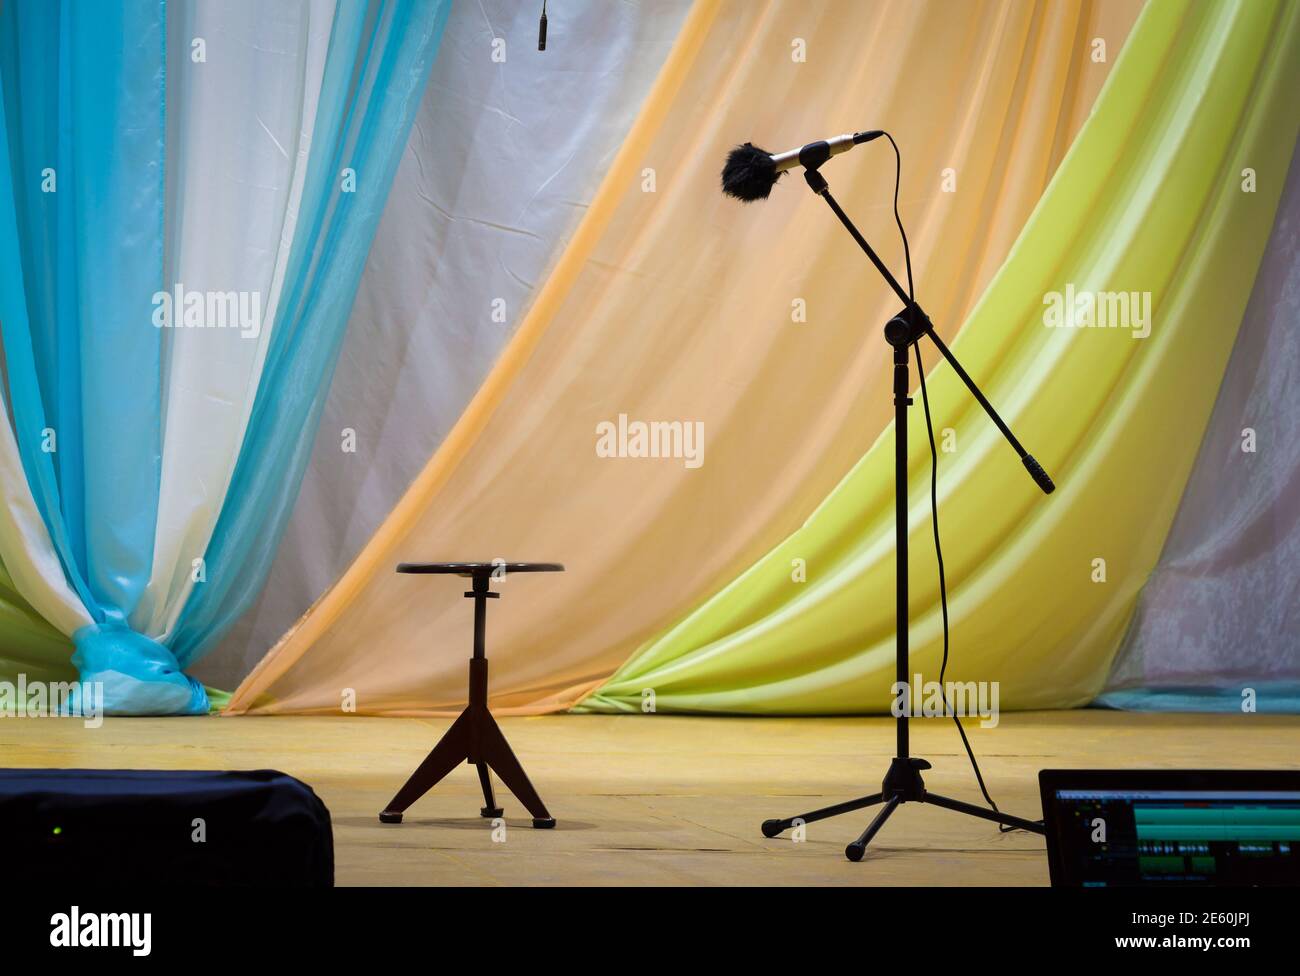 Ready for performance, microphone and stool on stage Stock Photo